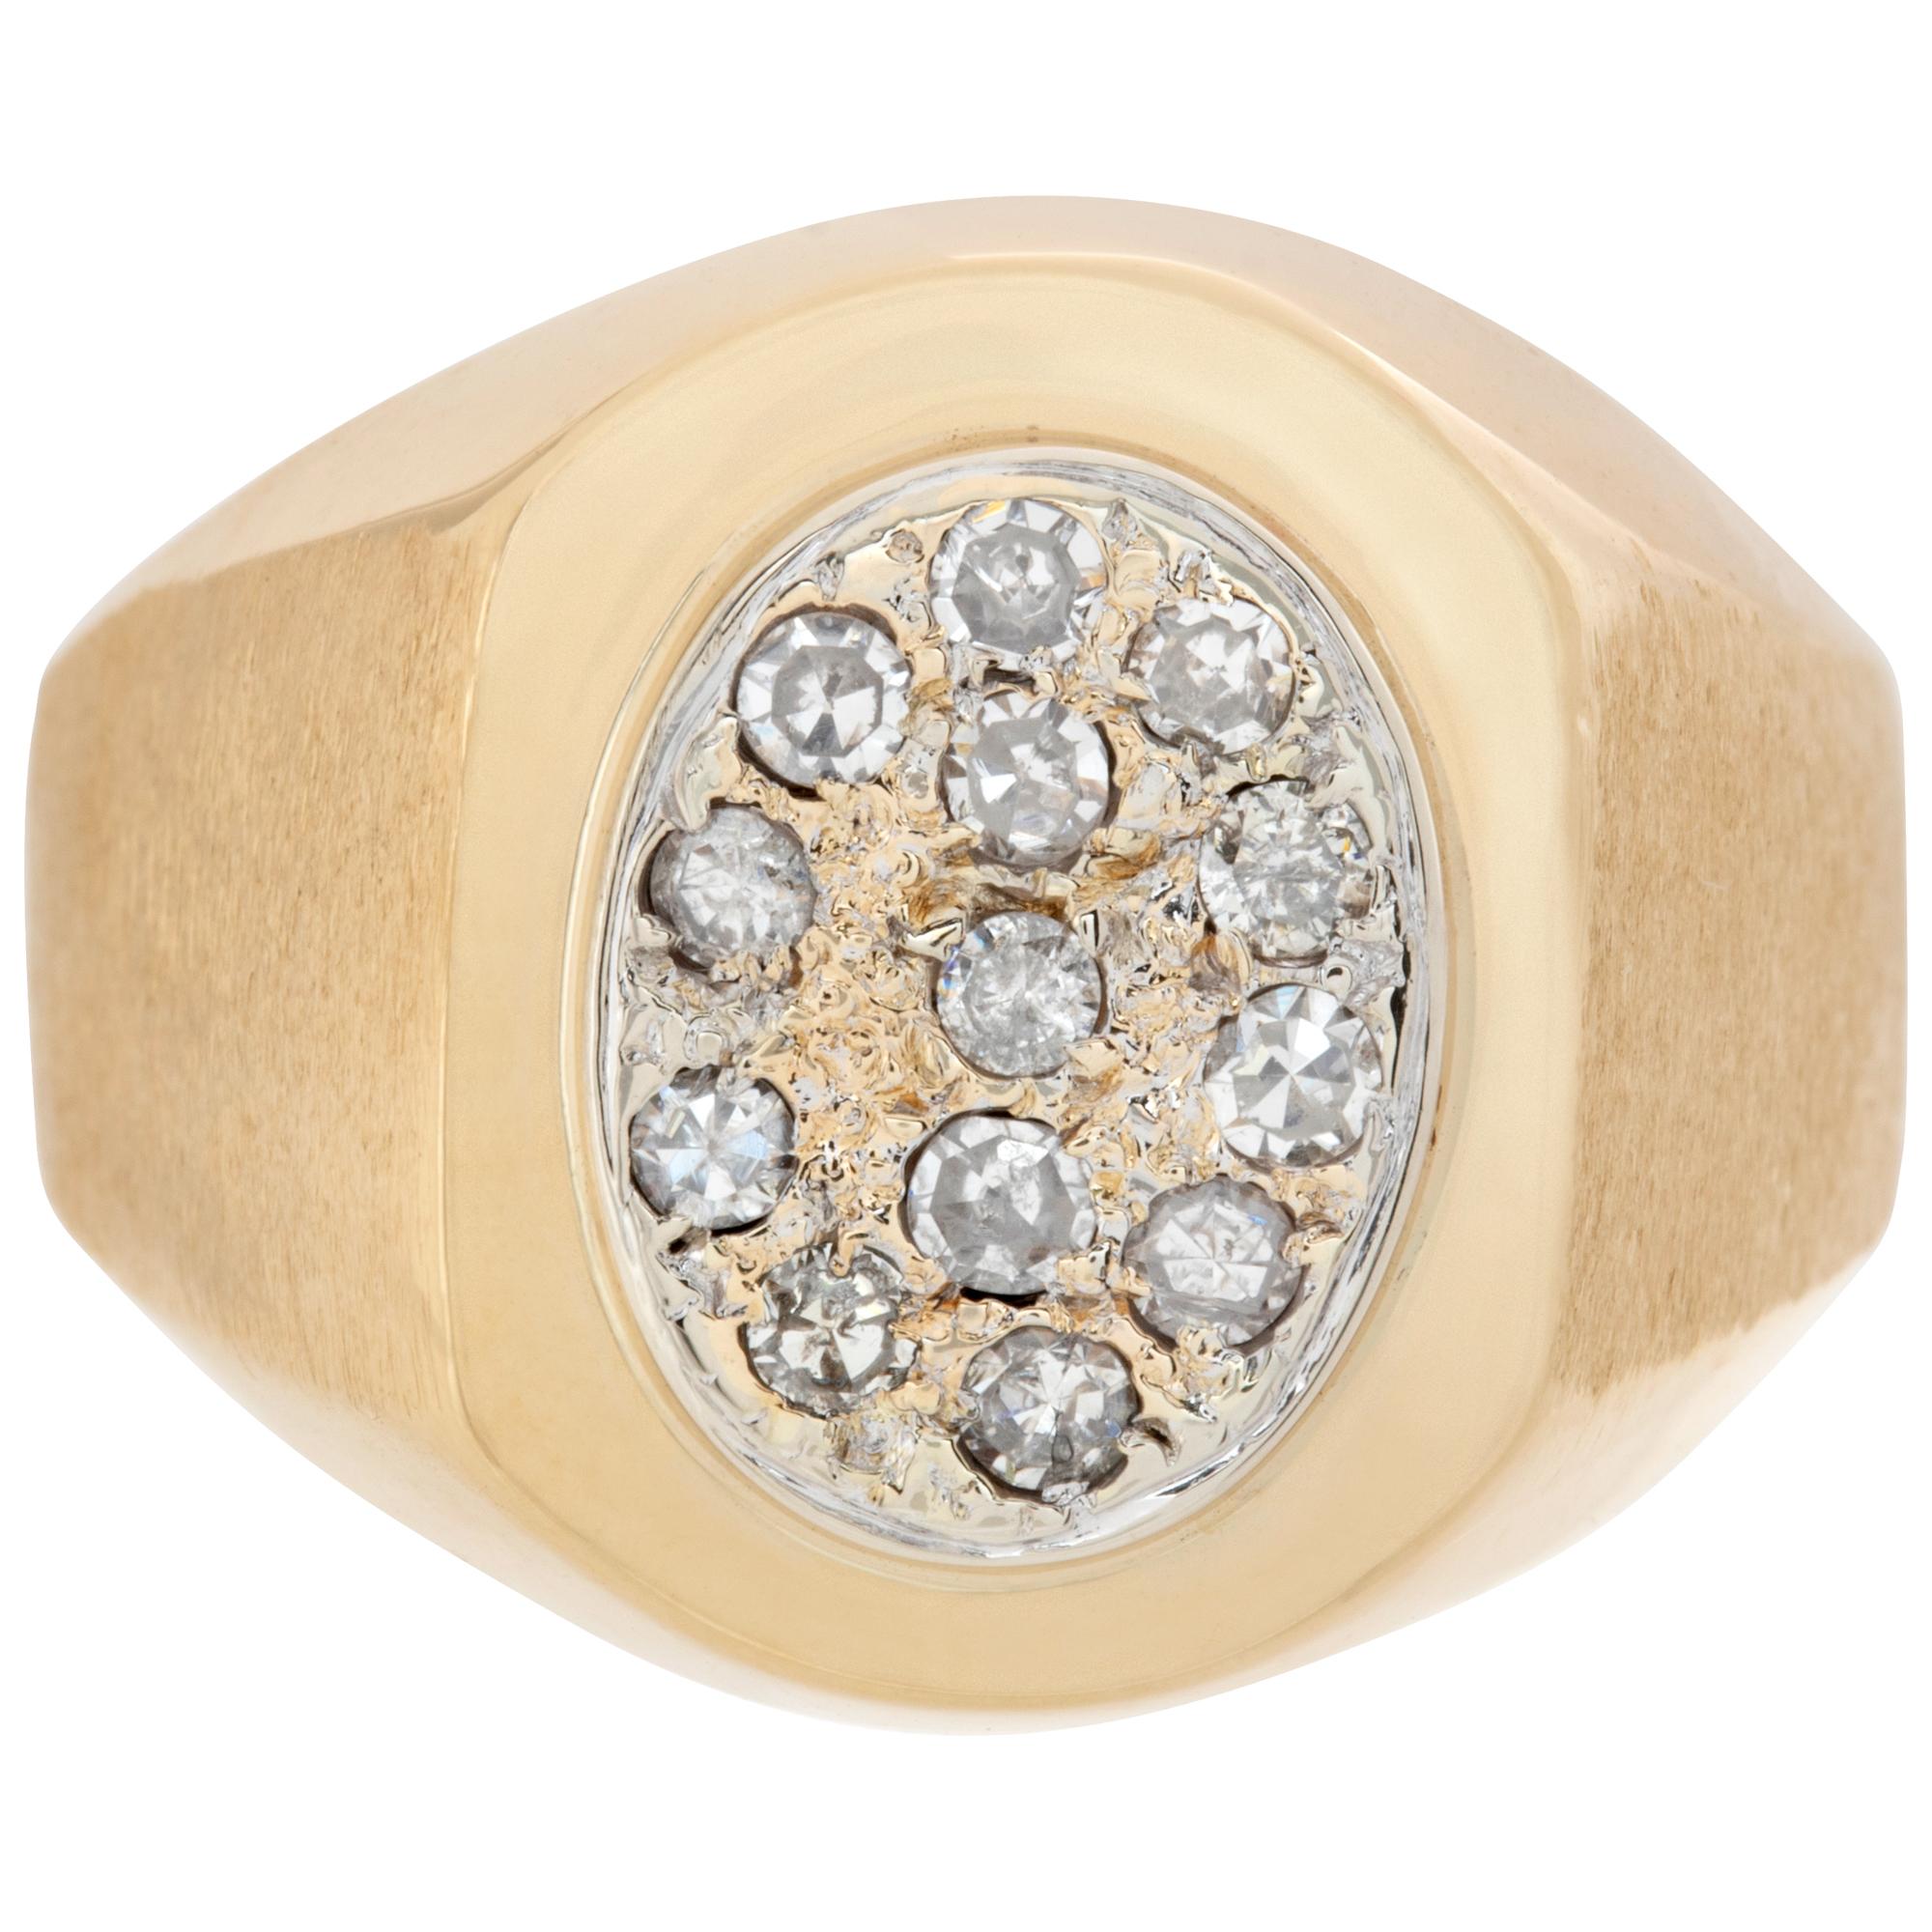 Mens Pave diamond signet ring with approximately 0.35 carats in round cut diamonds. Size 9.5.This Diamond ring is currently size 9.5 and some items can be sized up or down, please ask! It weighs 7.2 pennyweights and is 14k.
